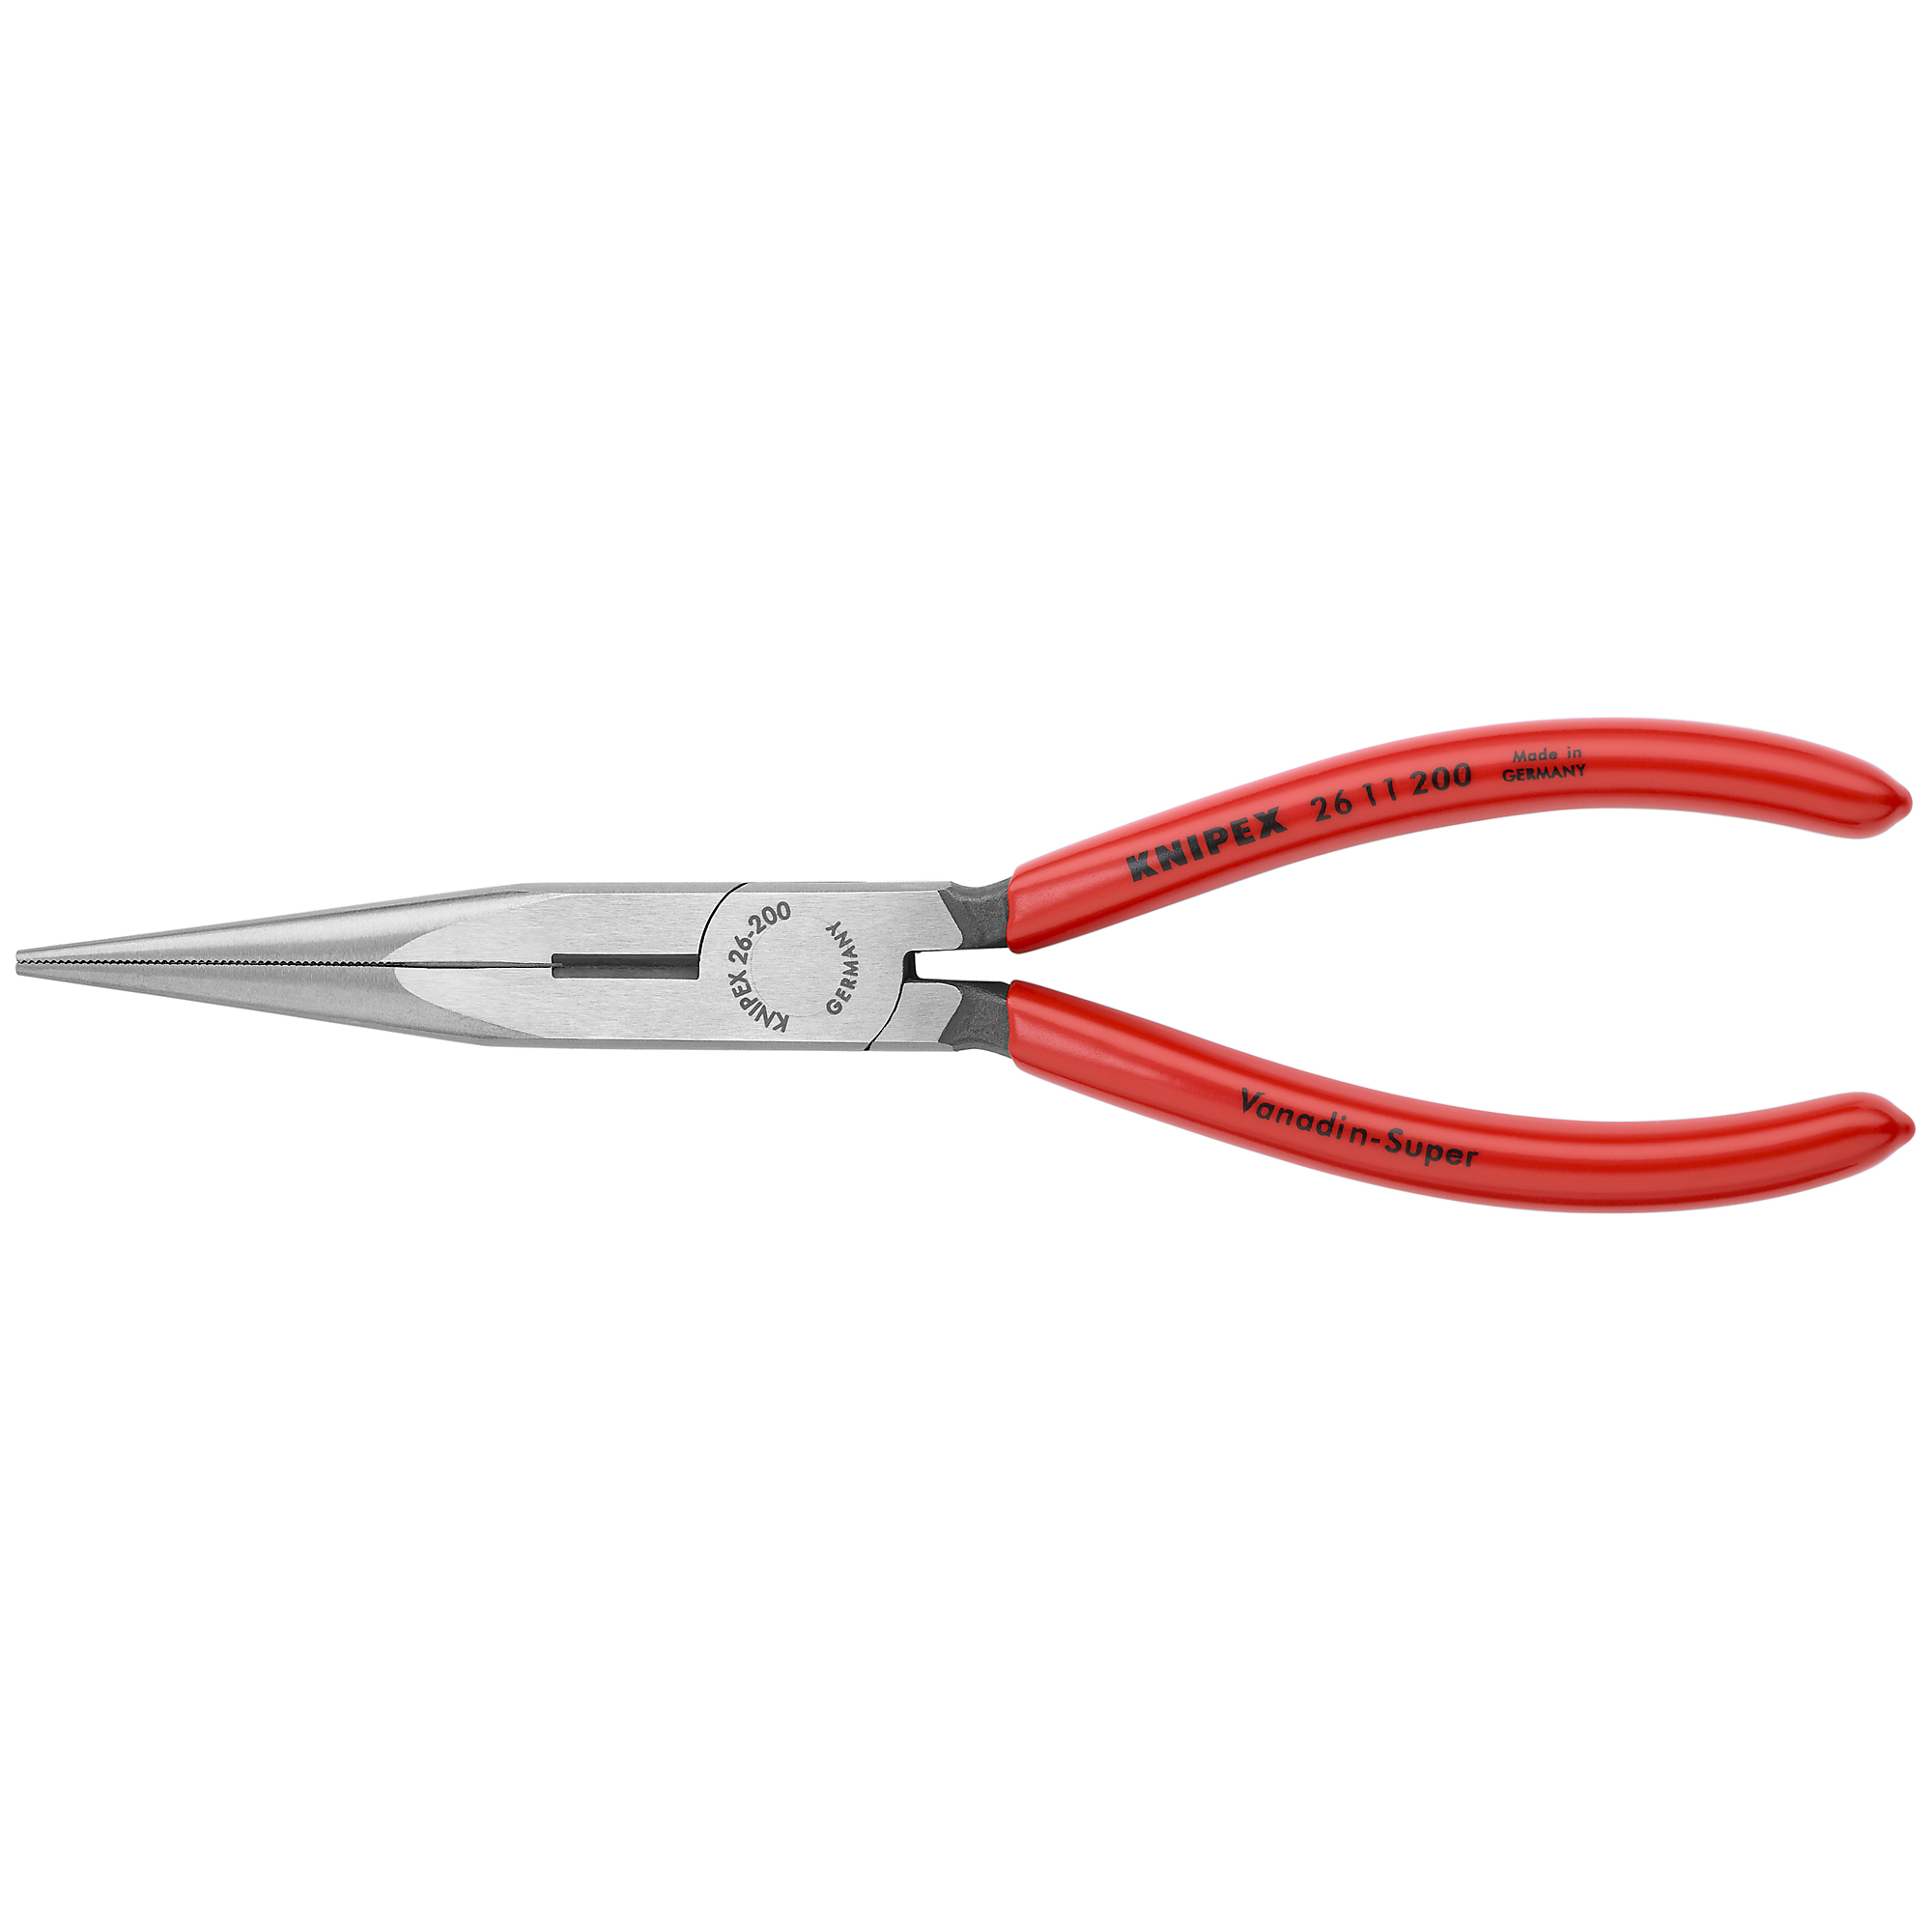 KNIPEX, Long Nose Pliers w/Cutter, Bulk, 8Inch, Pieces (qty.) 1 Material Steel, Jaw Capacity 0.125 in, Model 26 11 200